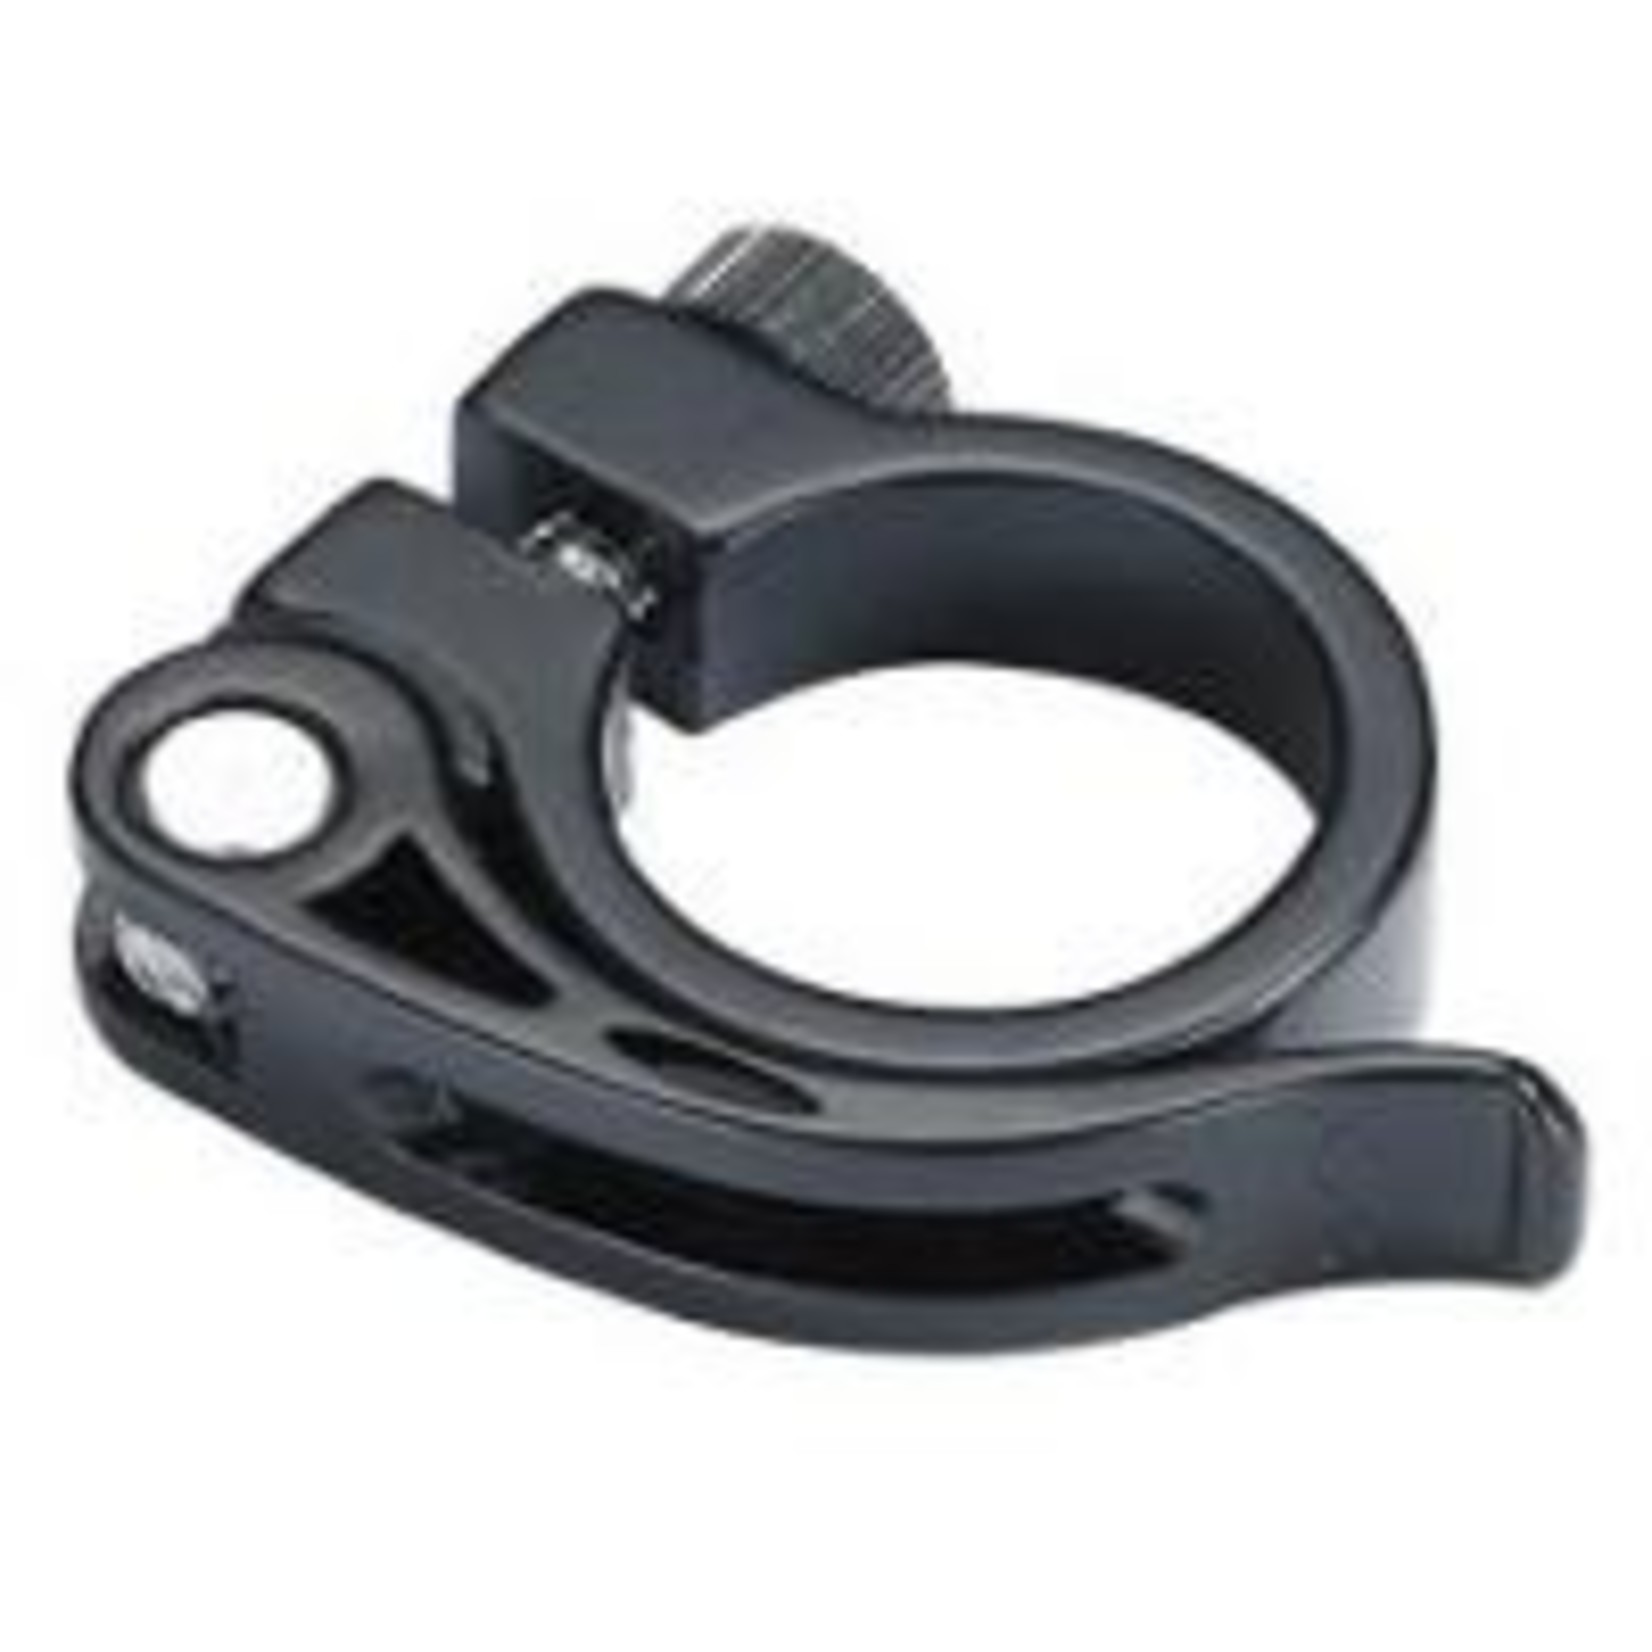 COLOURY Coloury Bicycle Seatpost Post Clamp 31.8 Quick Release For Seat Alloy - Black